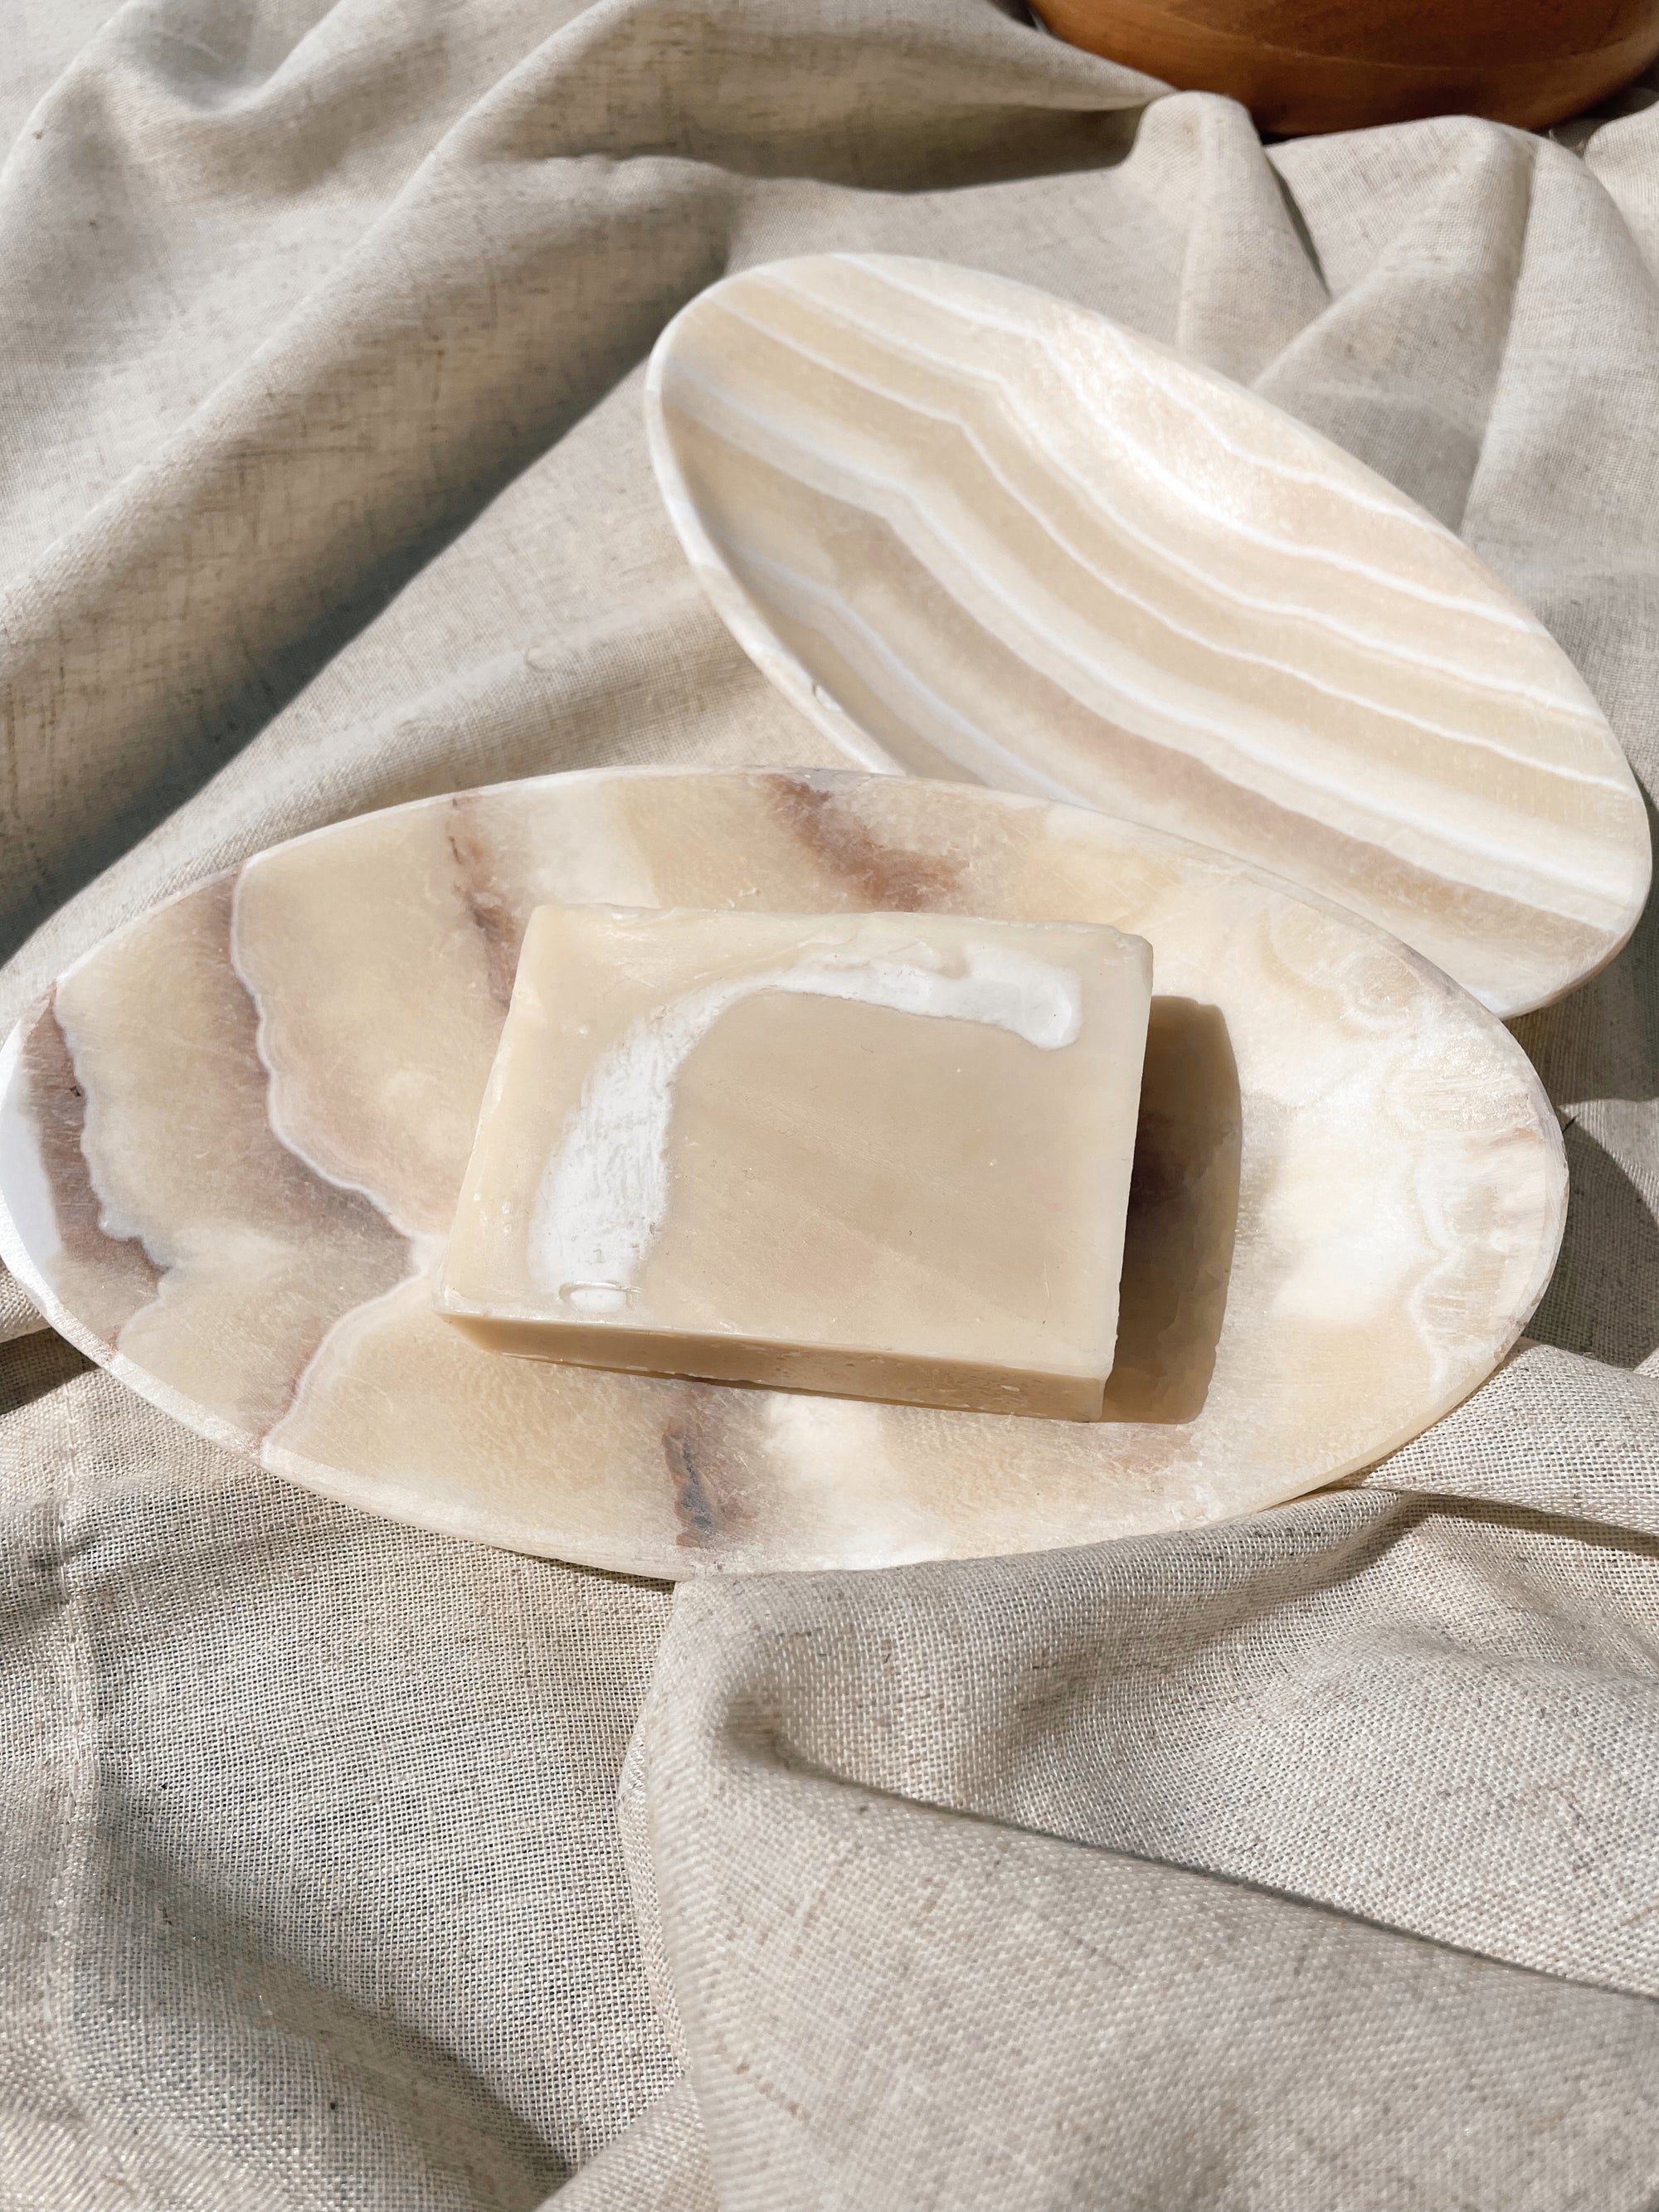 egyptian marble soap dish